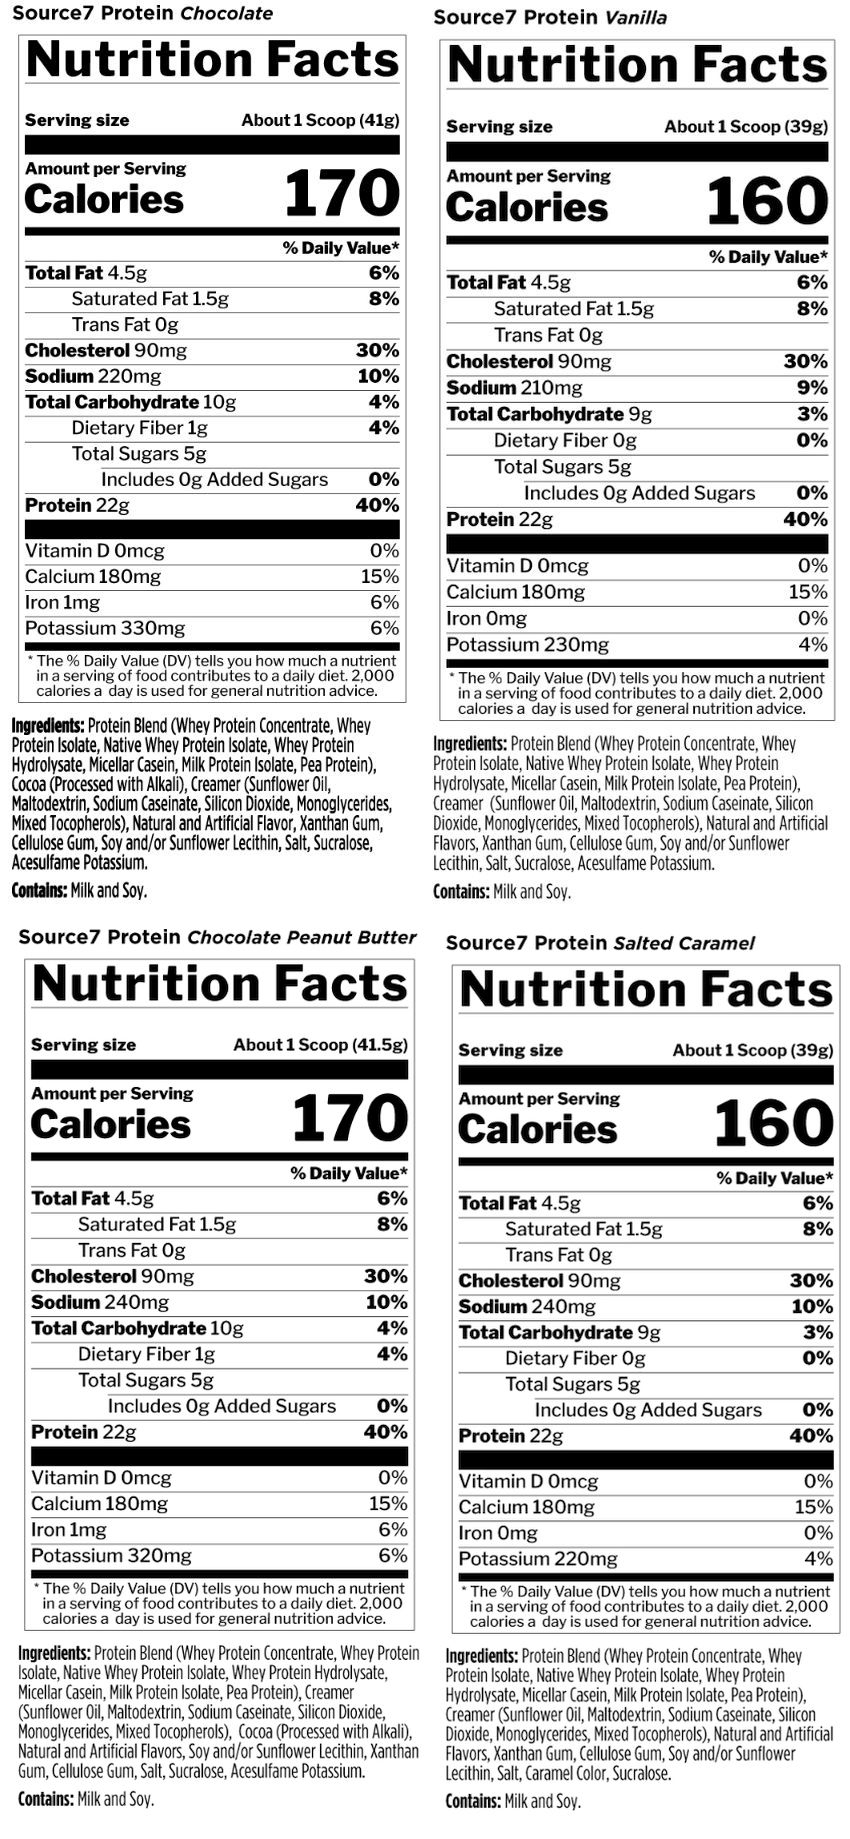 Nutritional facts for Source7 Protein in Chocolate, Vanilla, & Salted Caramel flavors; each offering 22g protein, low in fats, and contains 180mg calcium.